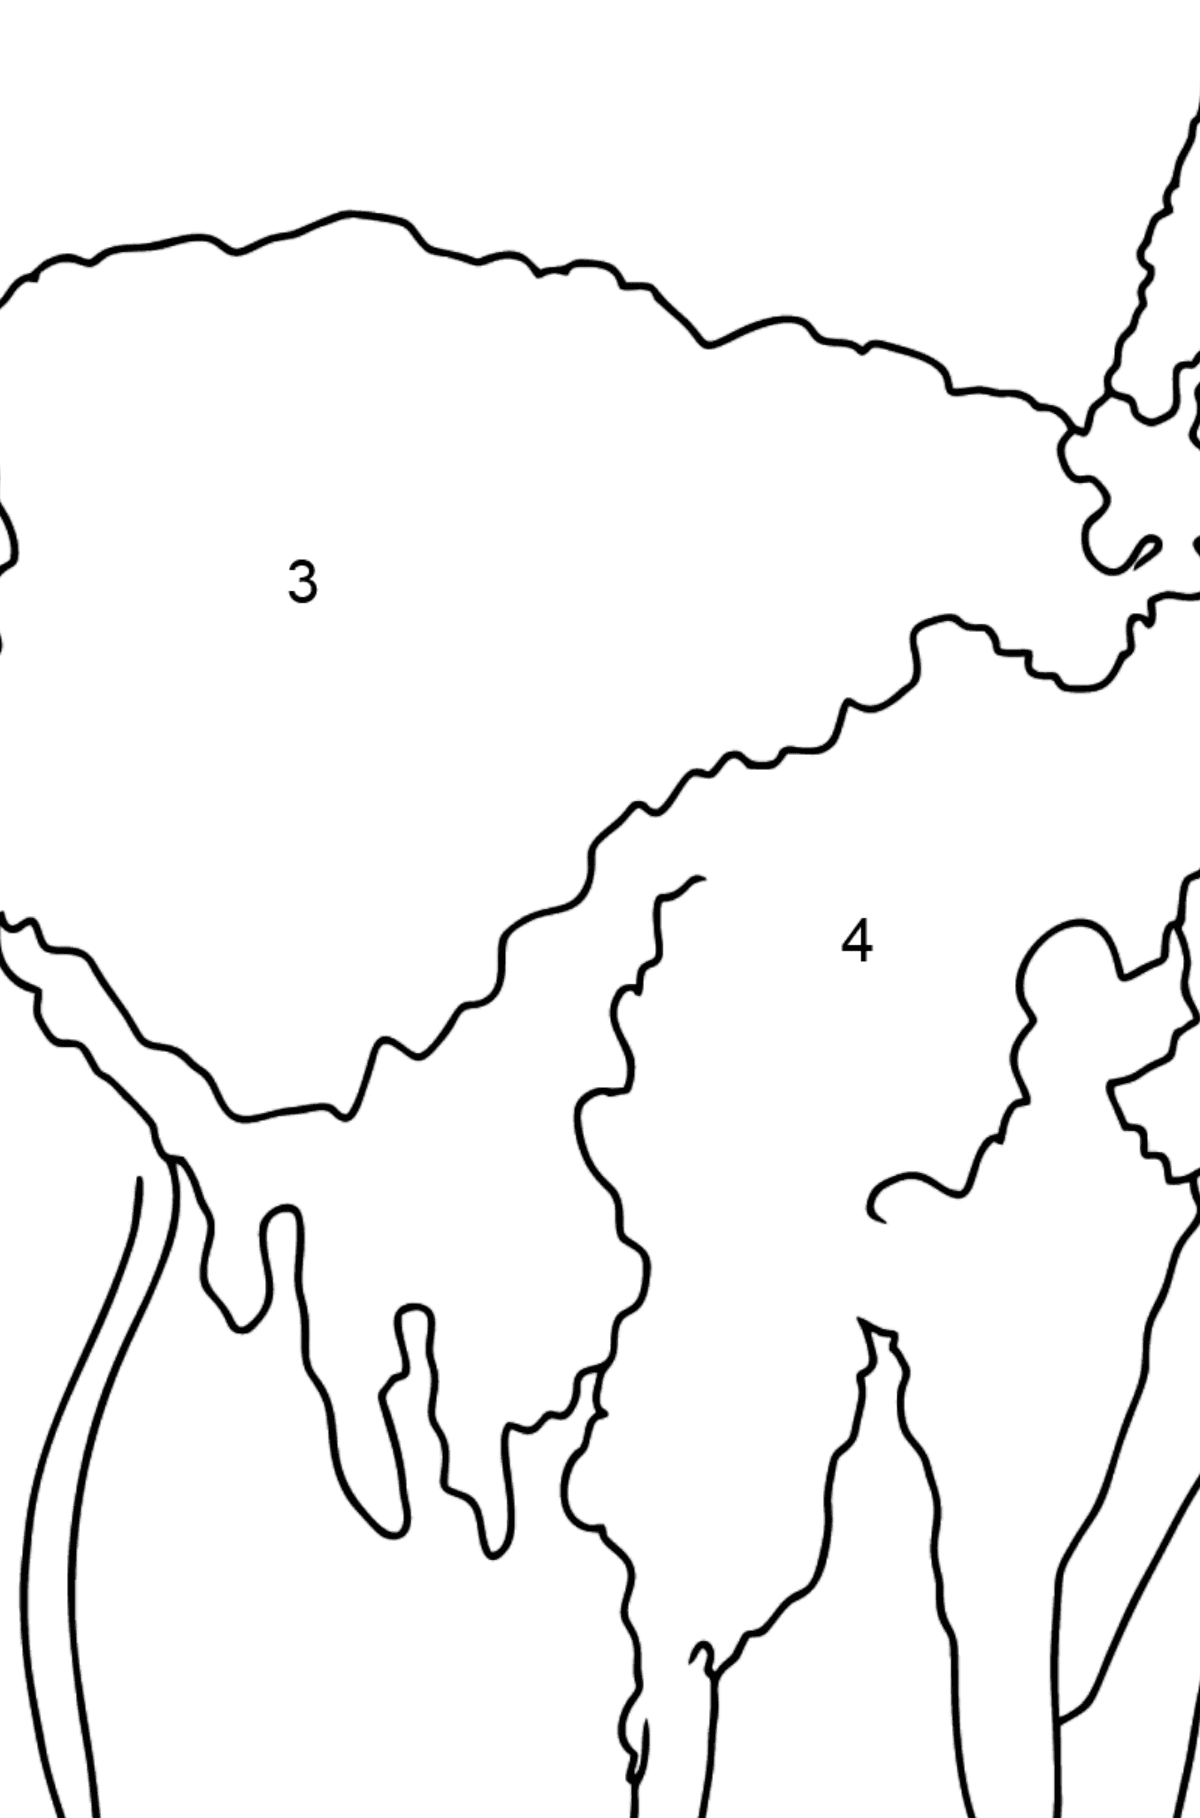 Coloring Page - A Panda is Looking into the Distance - Coloring by Numbers for Kids